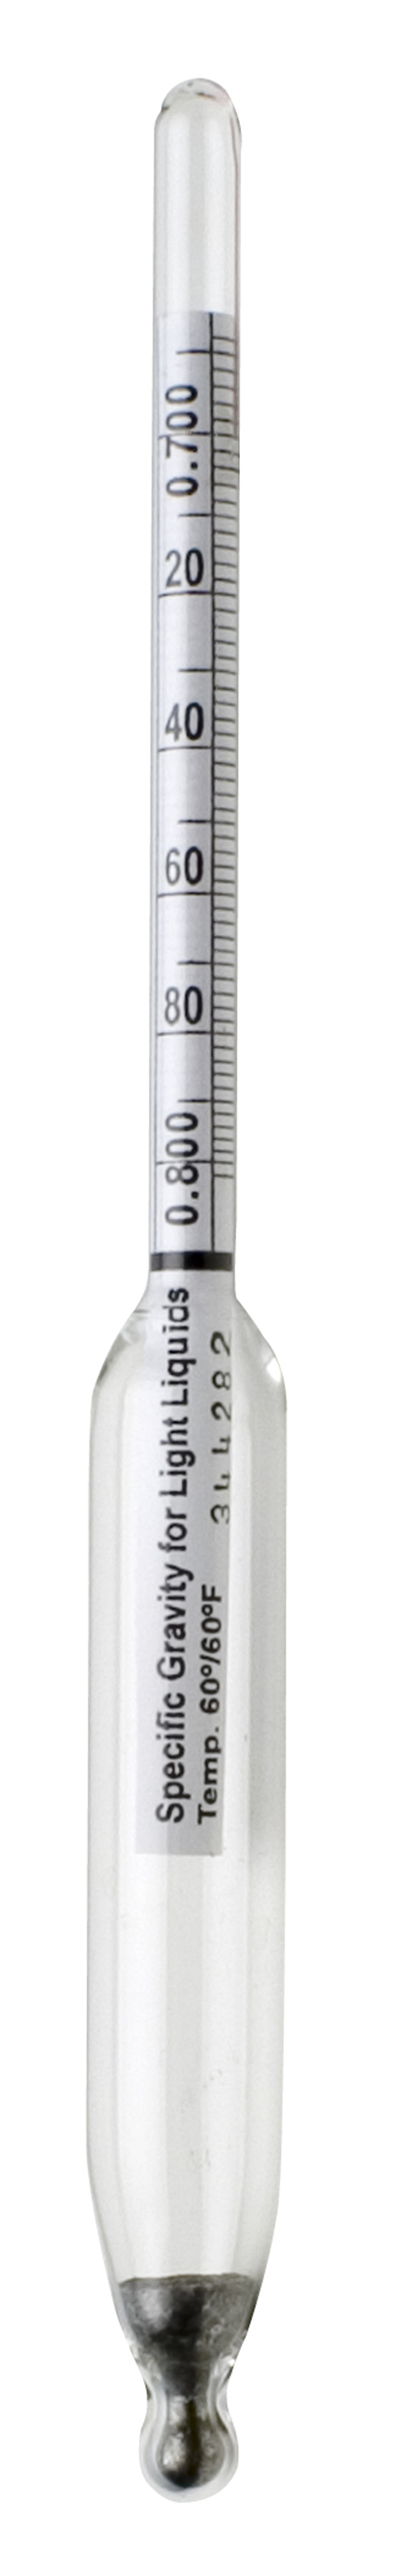 Atago 3447 DH-10F Digital Hydrometer, 1 to 1.4 Specific Gravity Electrolyte  Range